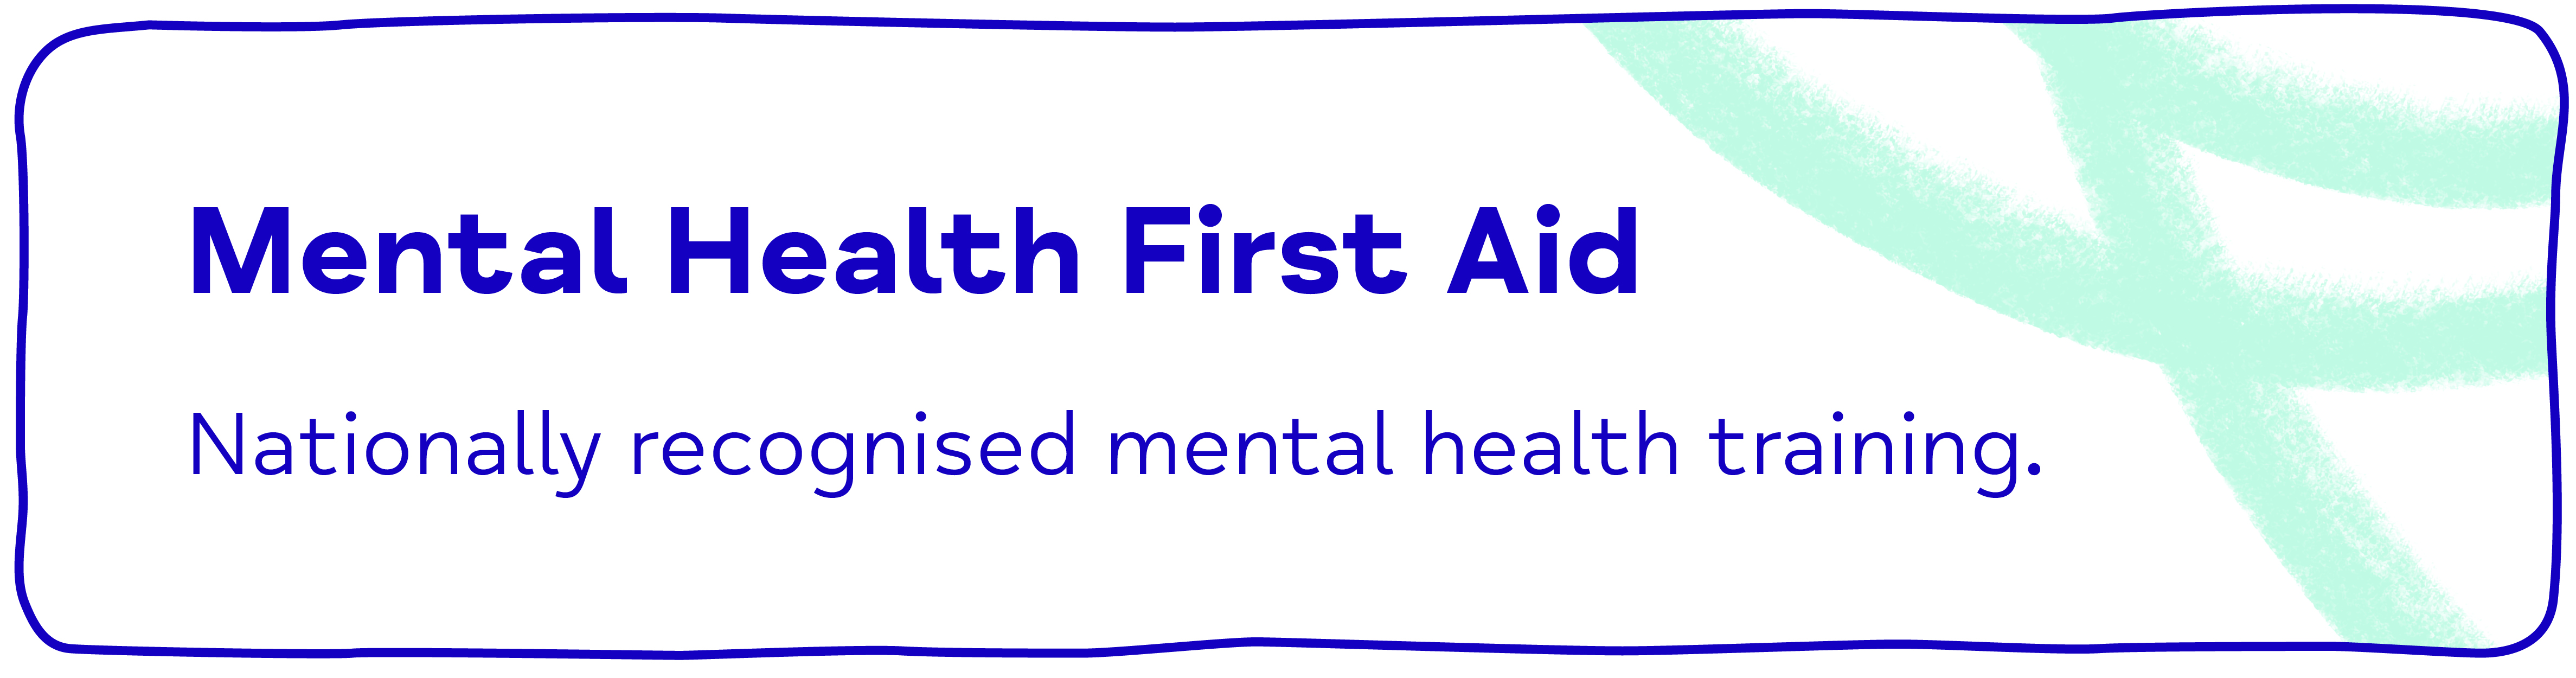 Mental Health First Aid Nationally recognised mental health training.